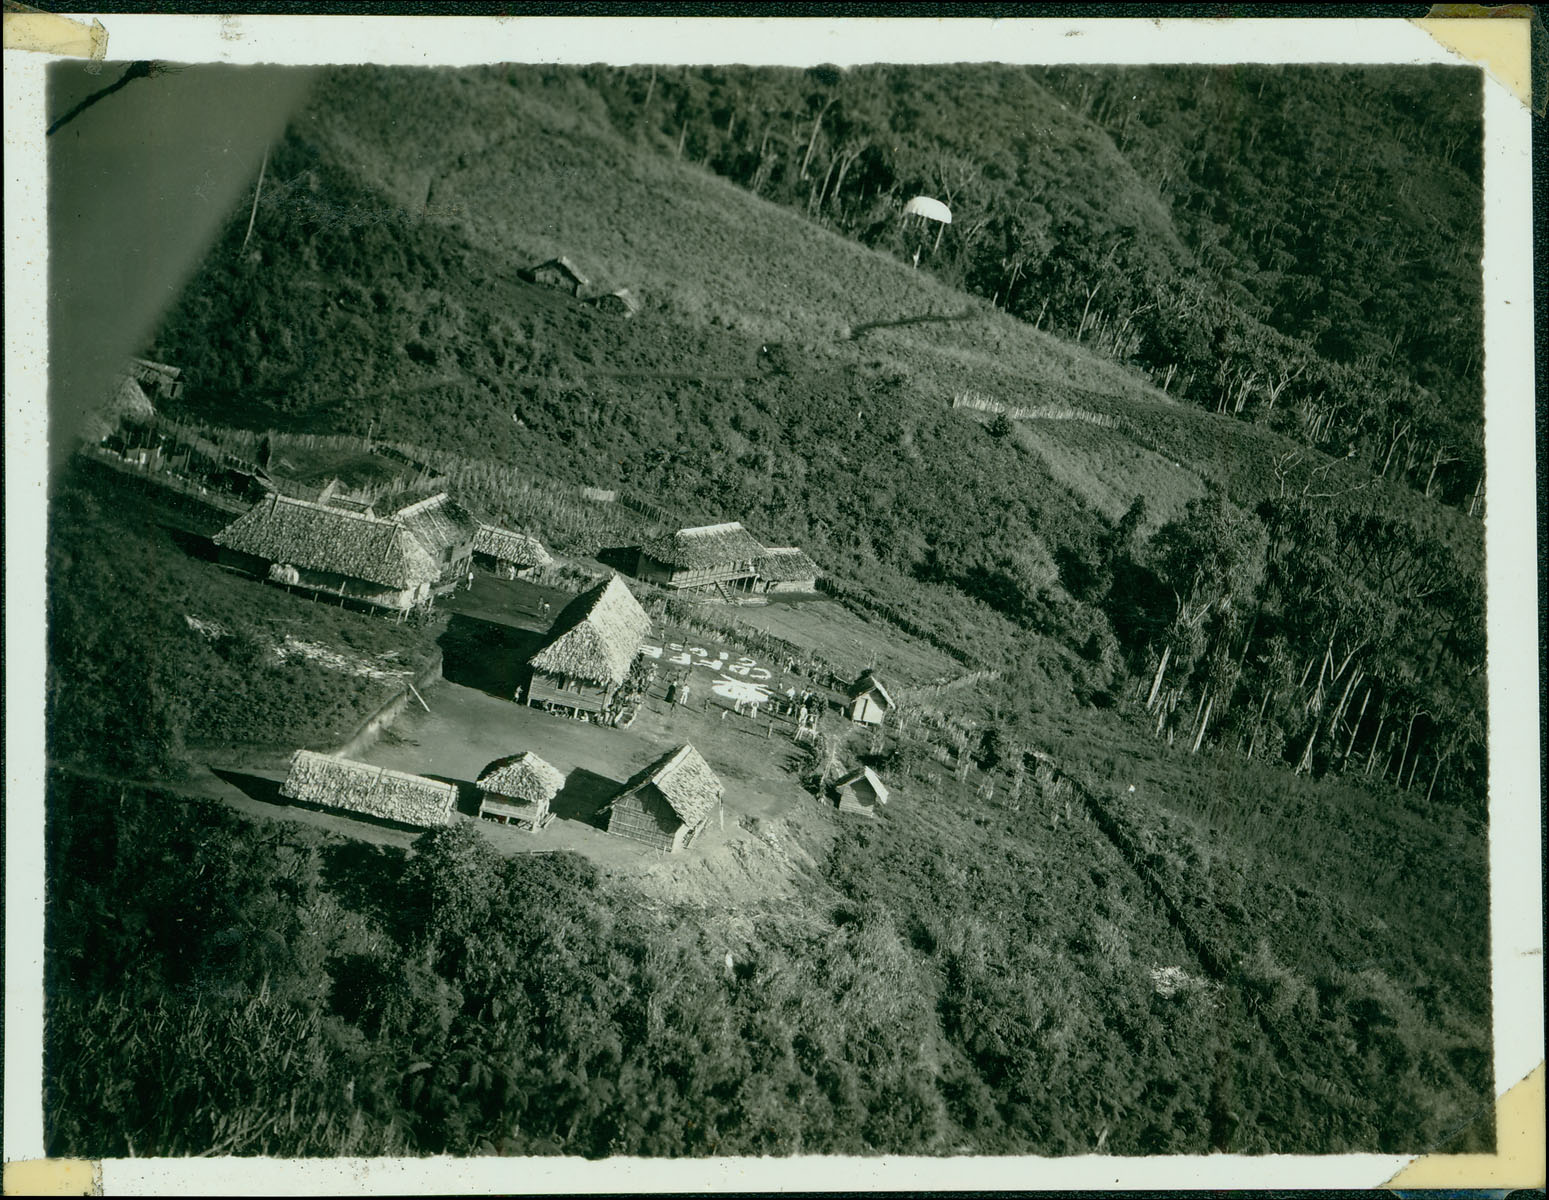 An aerial shot of the New Guinea native village that took in the ten Army officers. The parachute floating down contained either a letter or supplies for the officers.